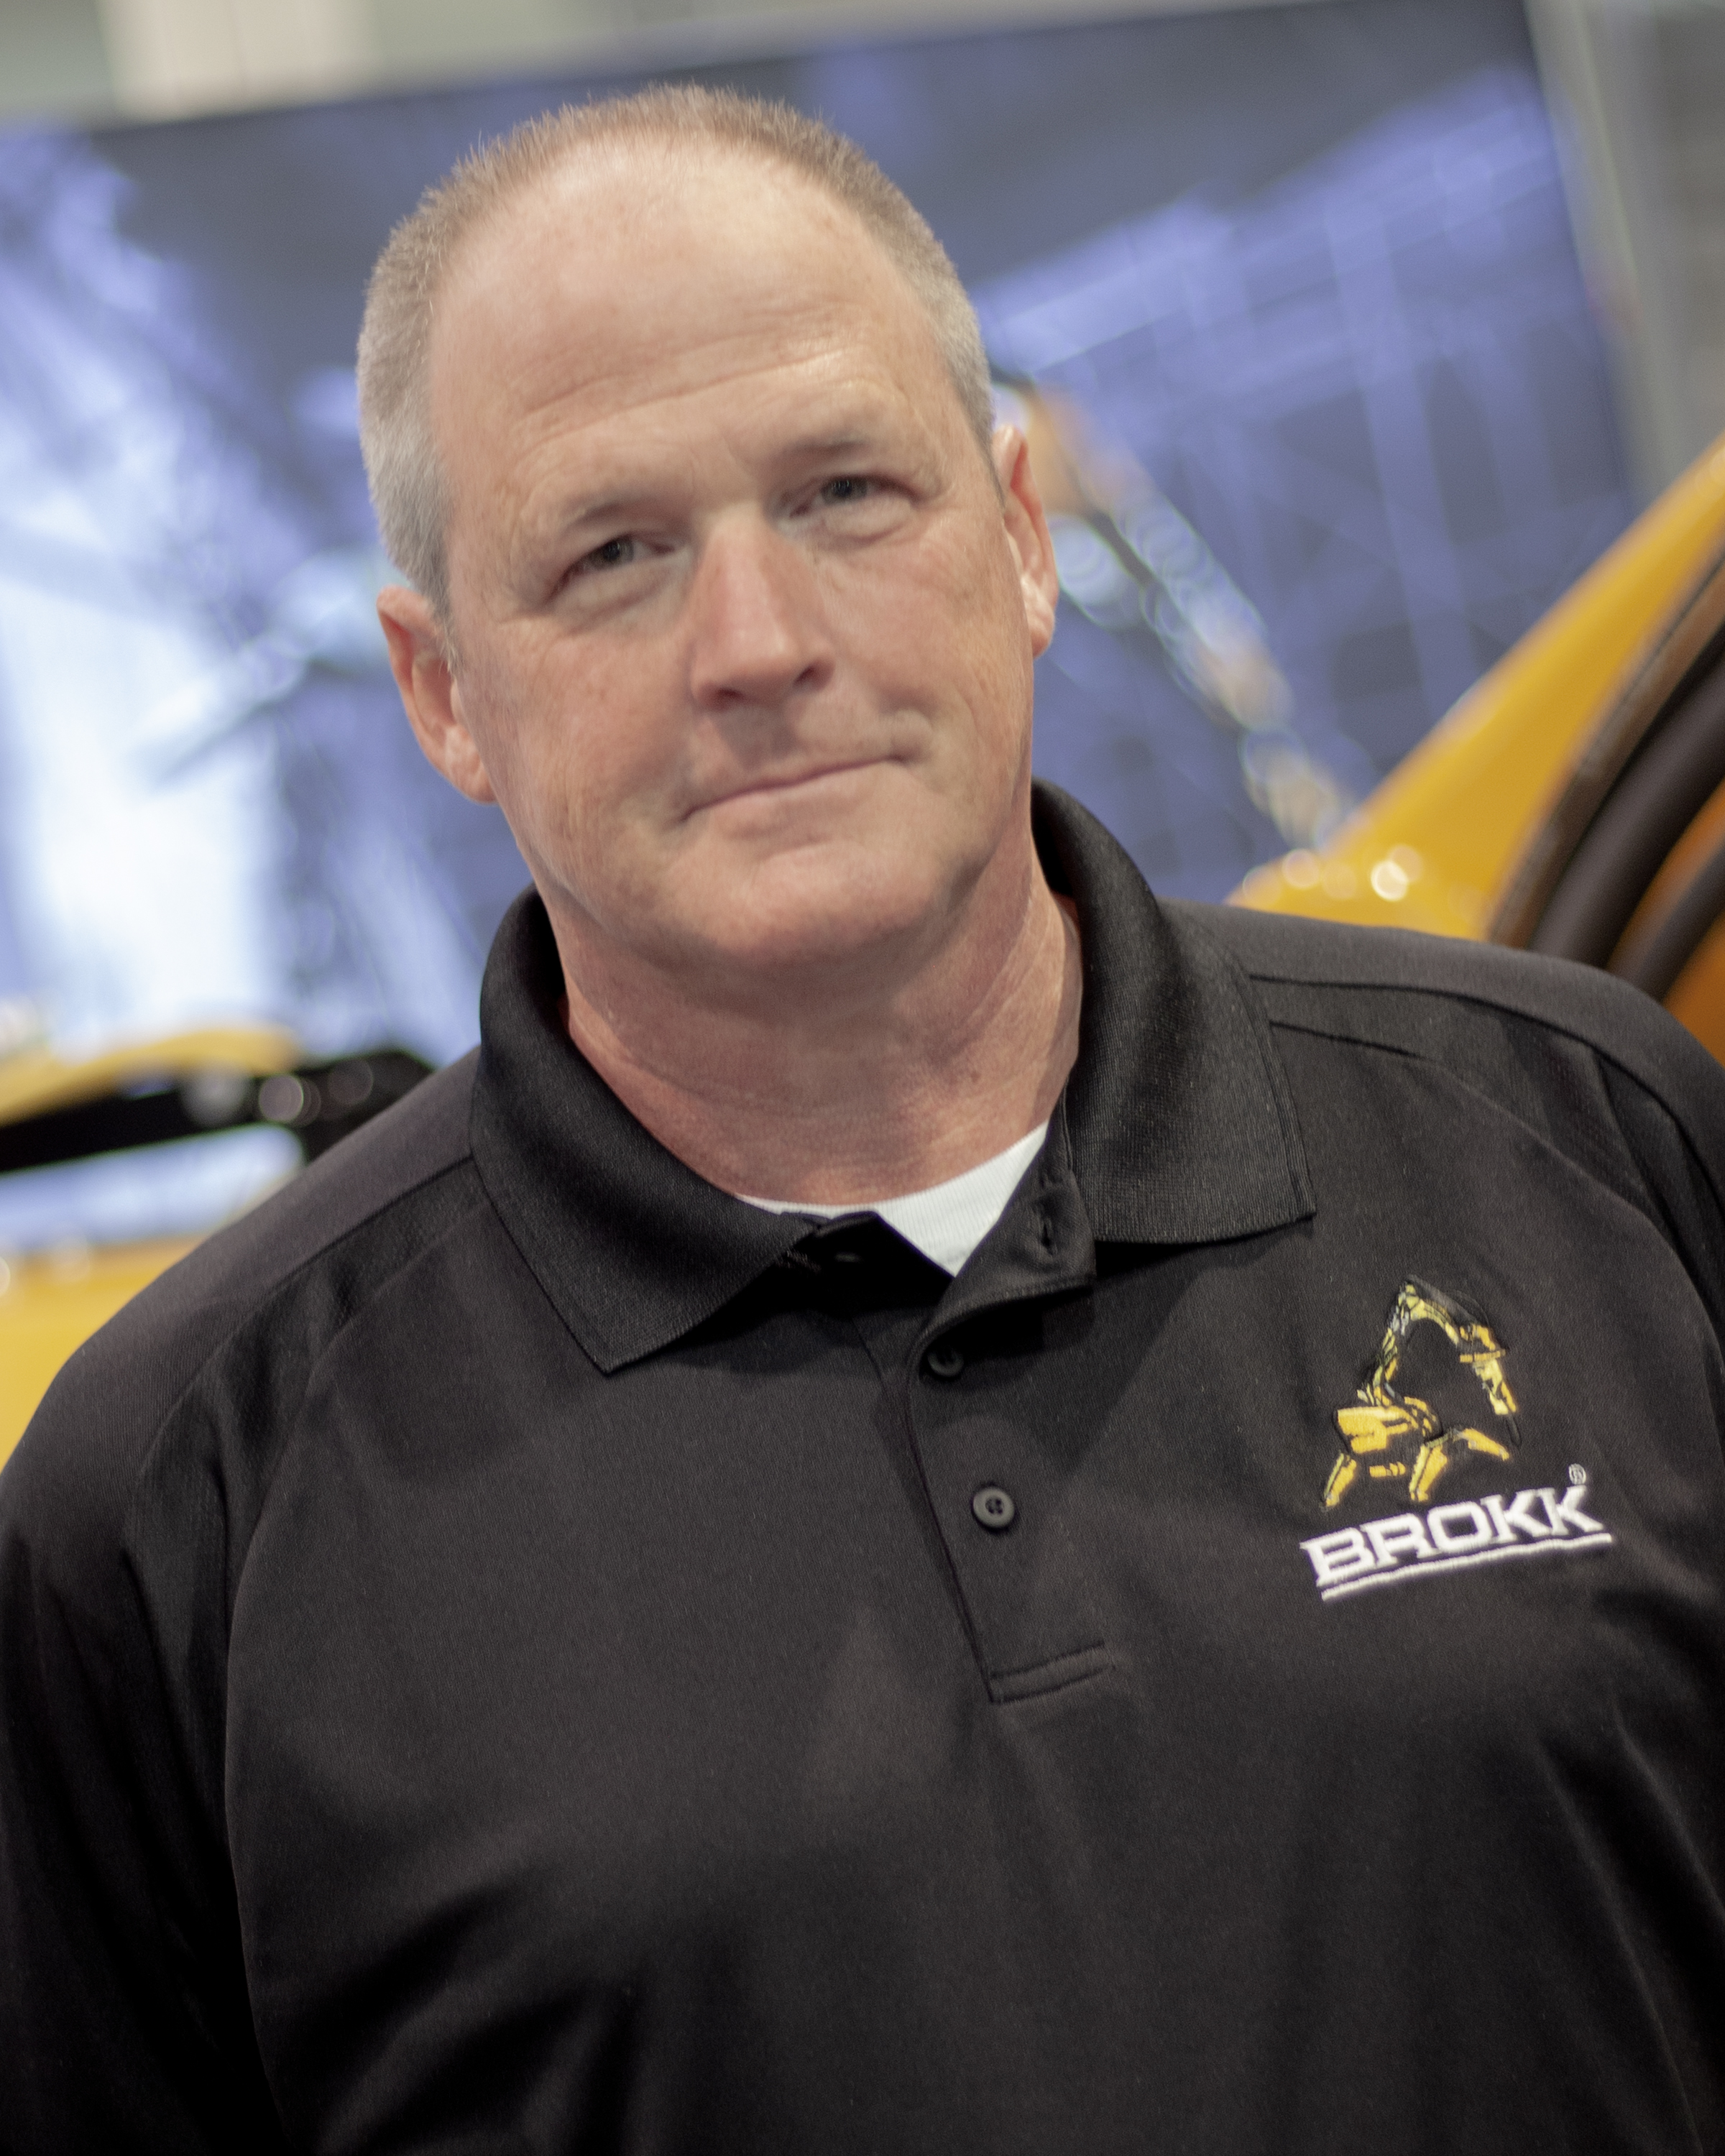 Brokk appoints Jeff Keeling as its first business development manager.